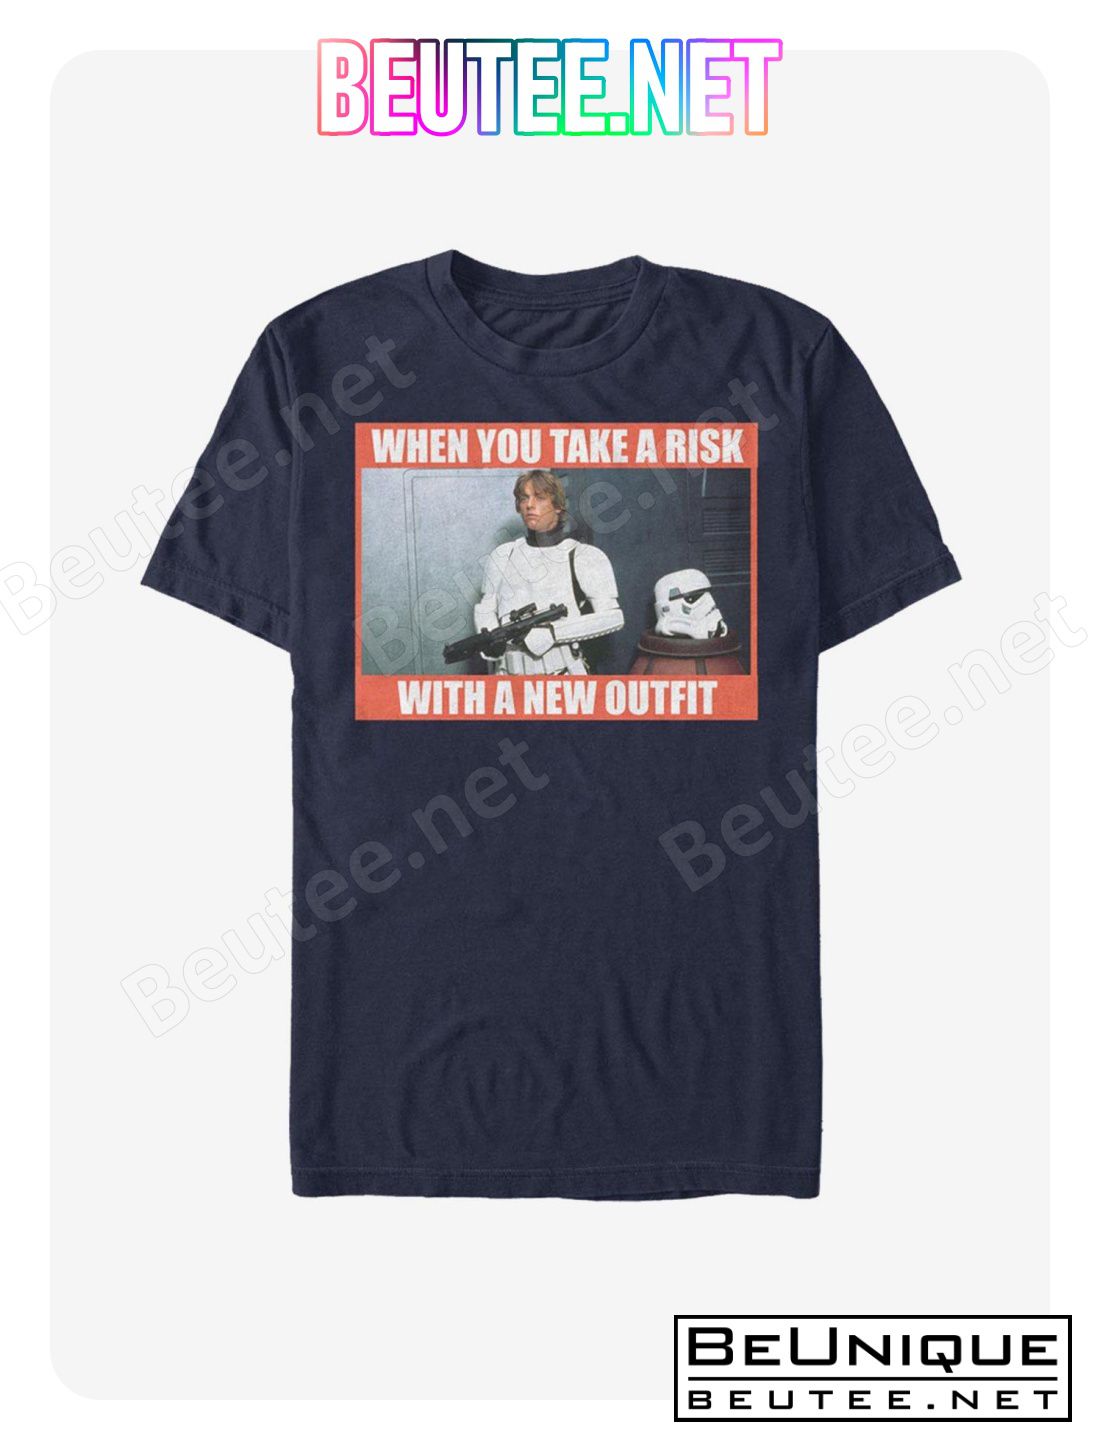 Star Wars New Outfit T-Shirt